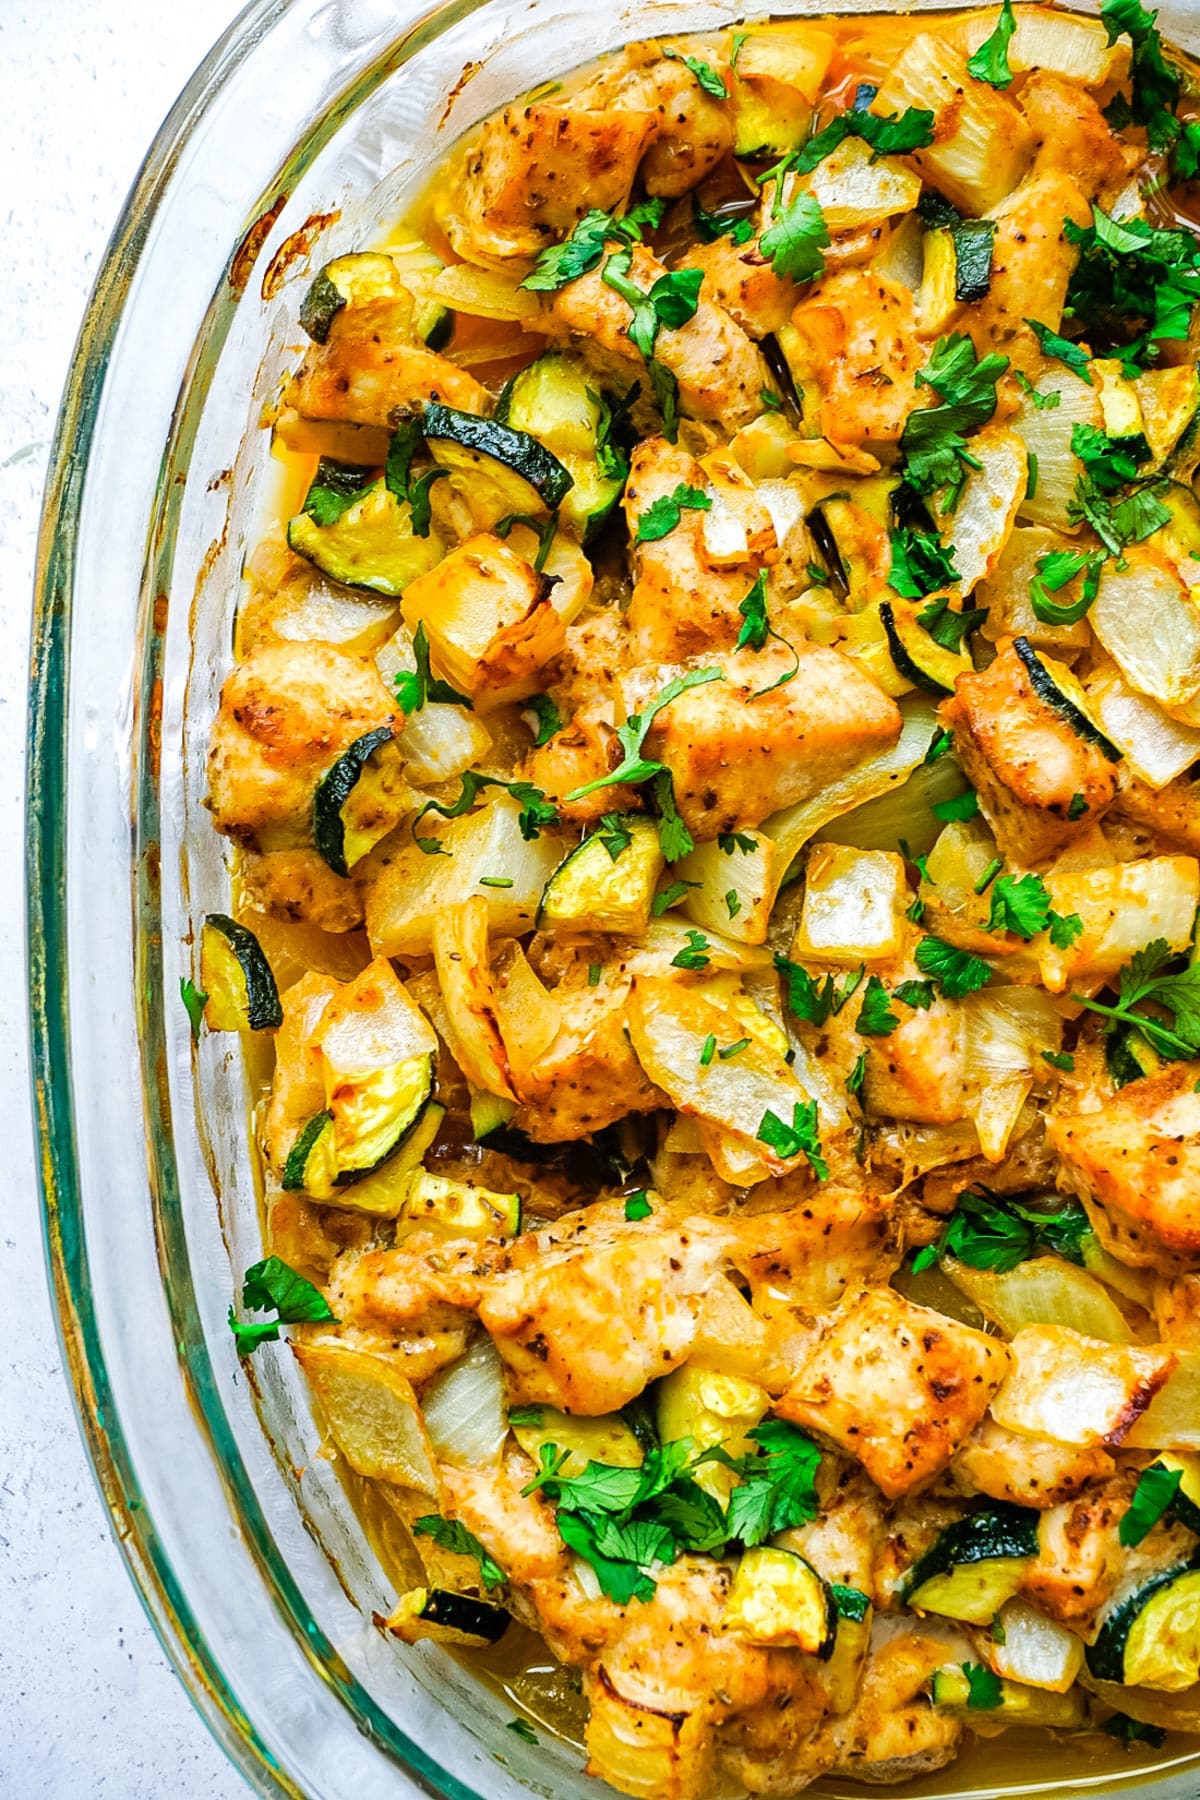 A close up picture of the Chicken and Zucchini Bake in a casserole dish.